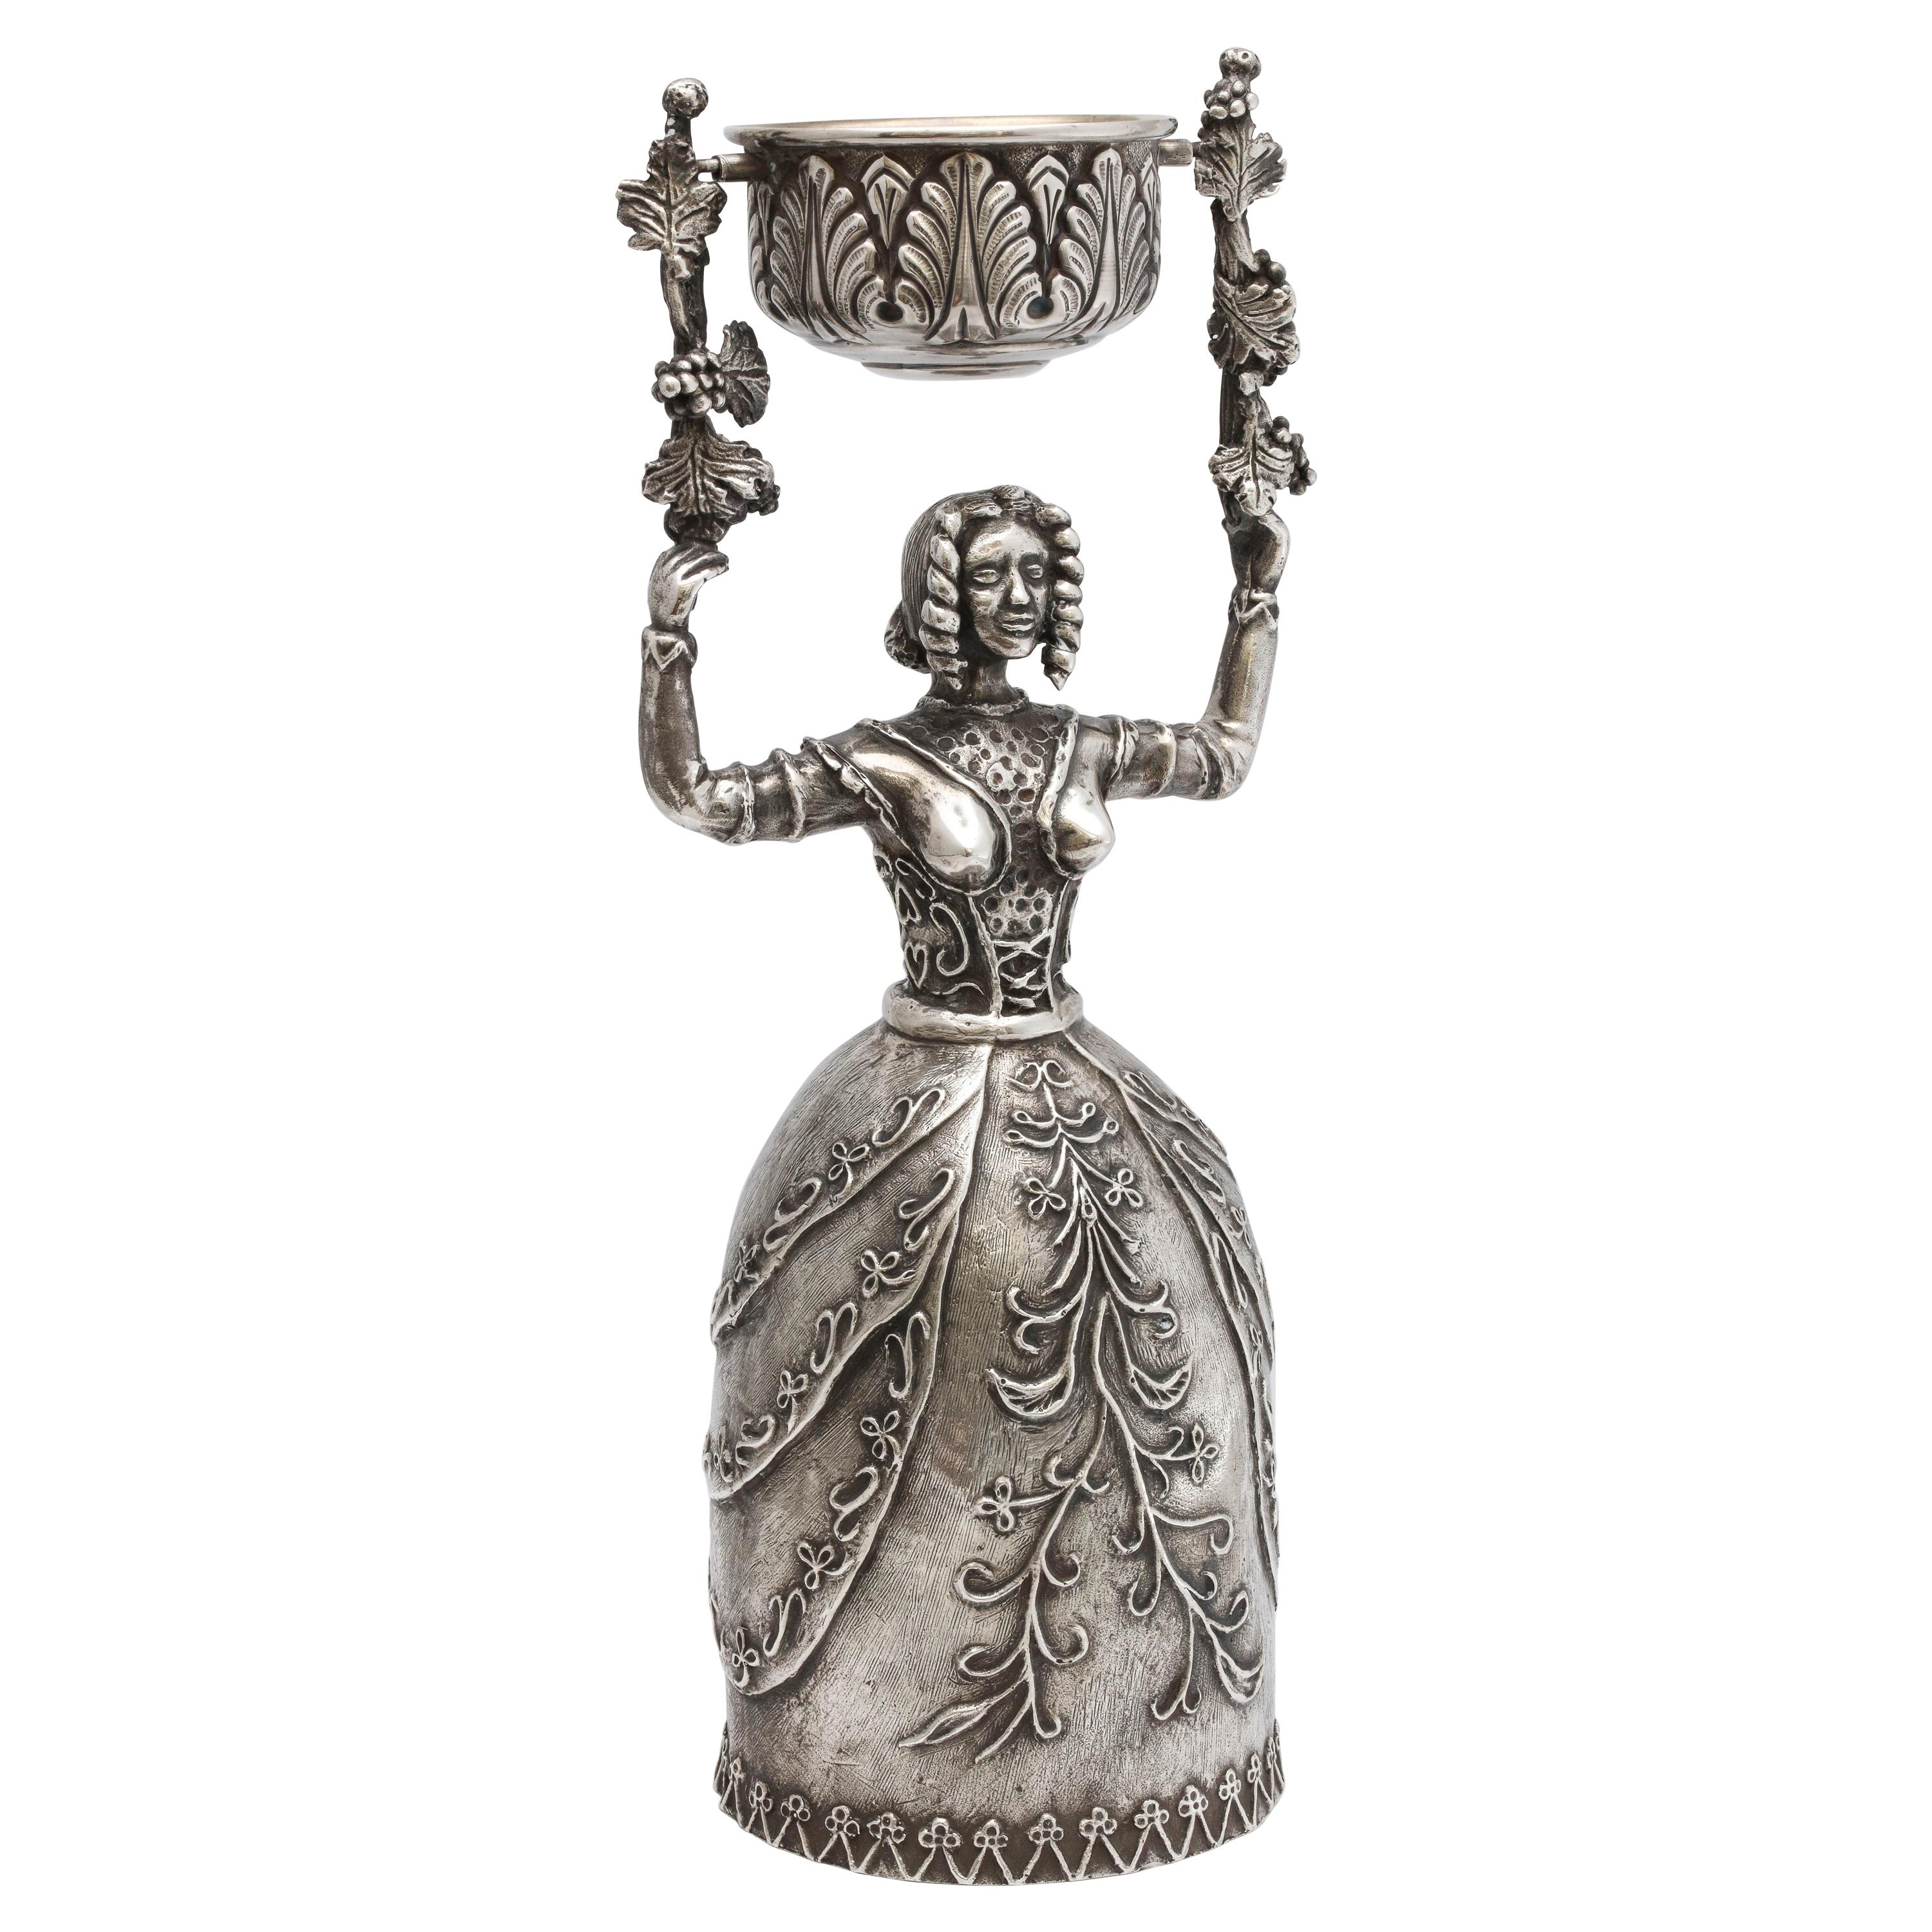 Large 17th Century-Style Sterling Silver Wager/Marriage Cup